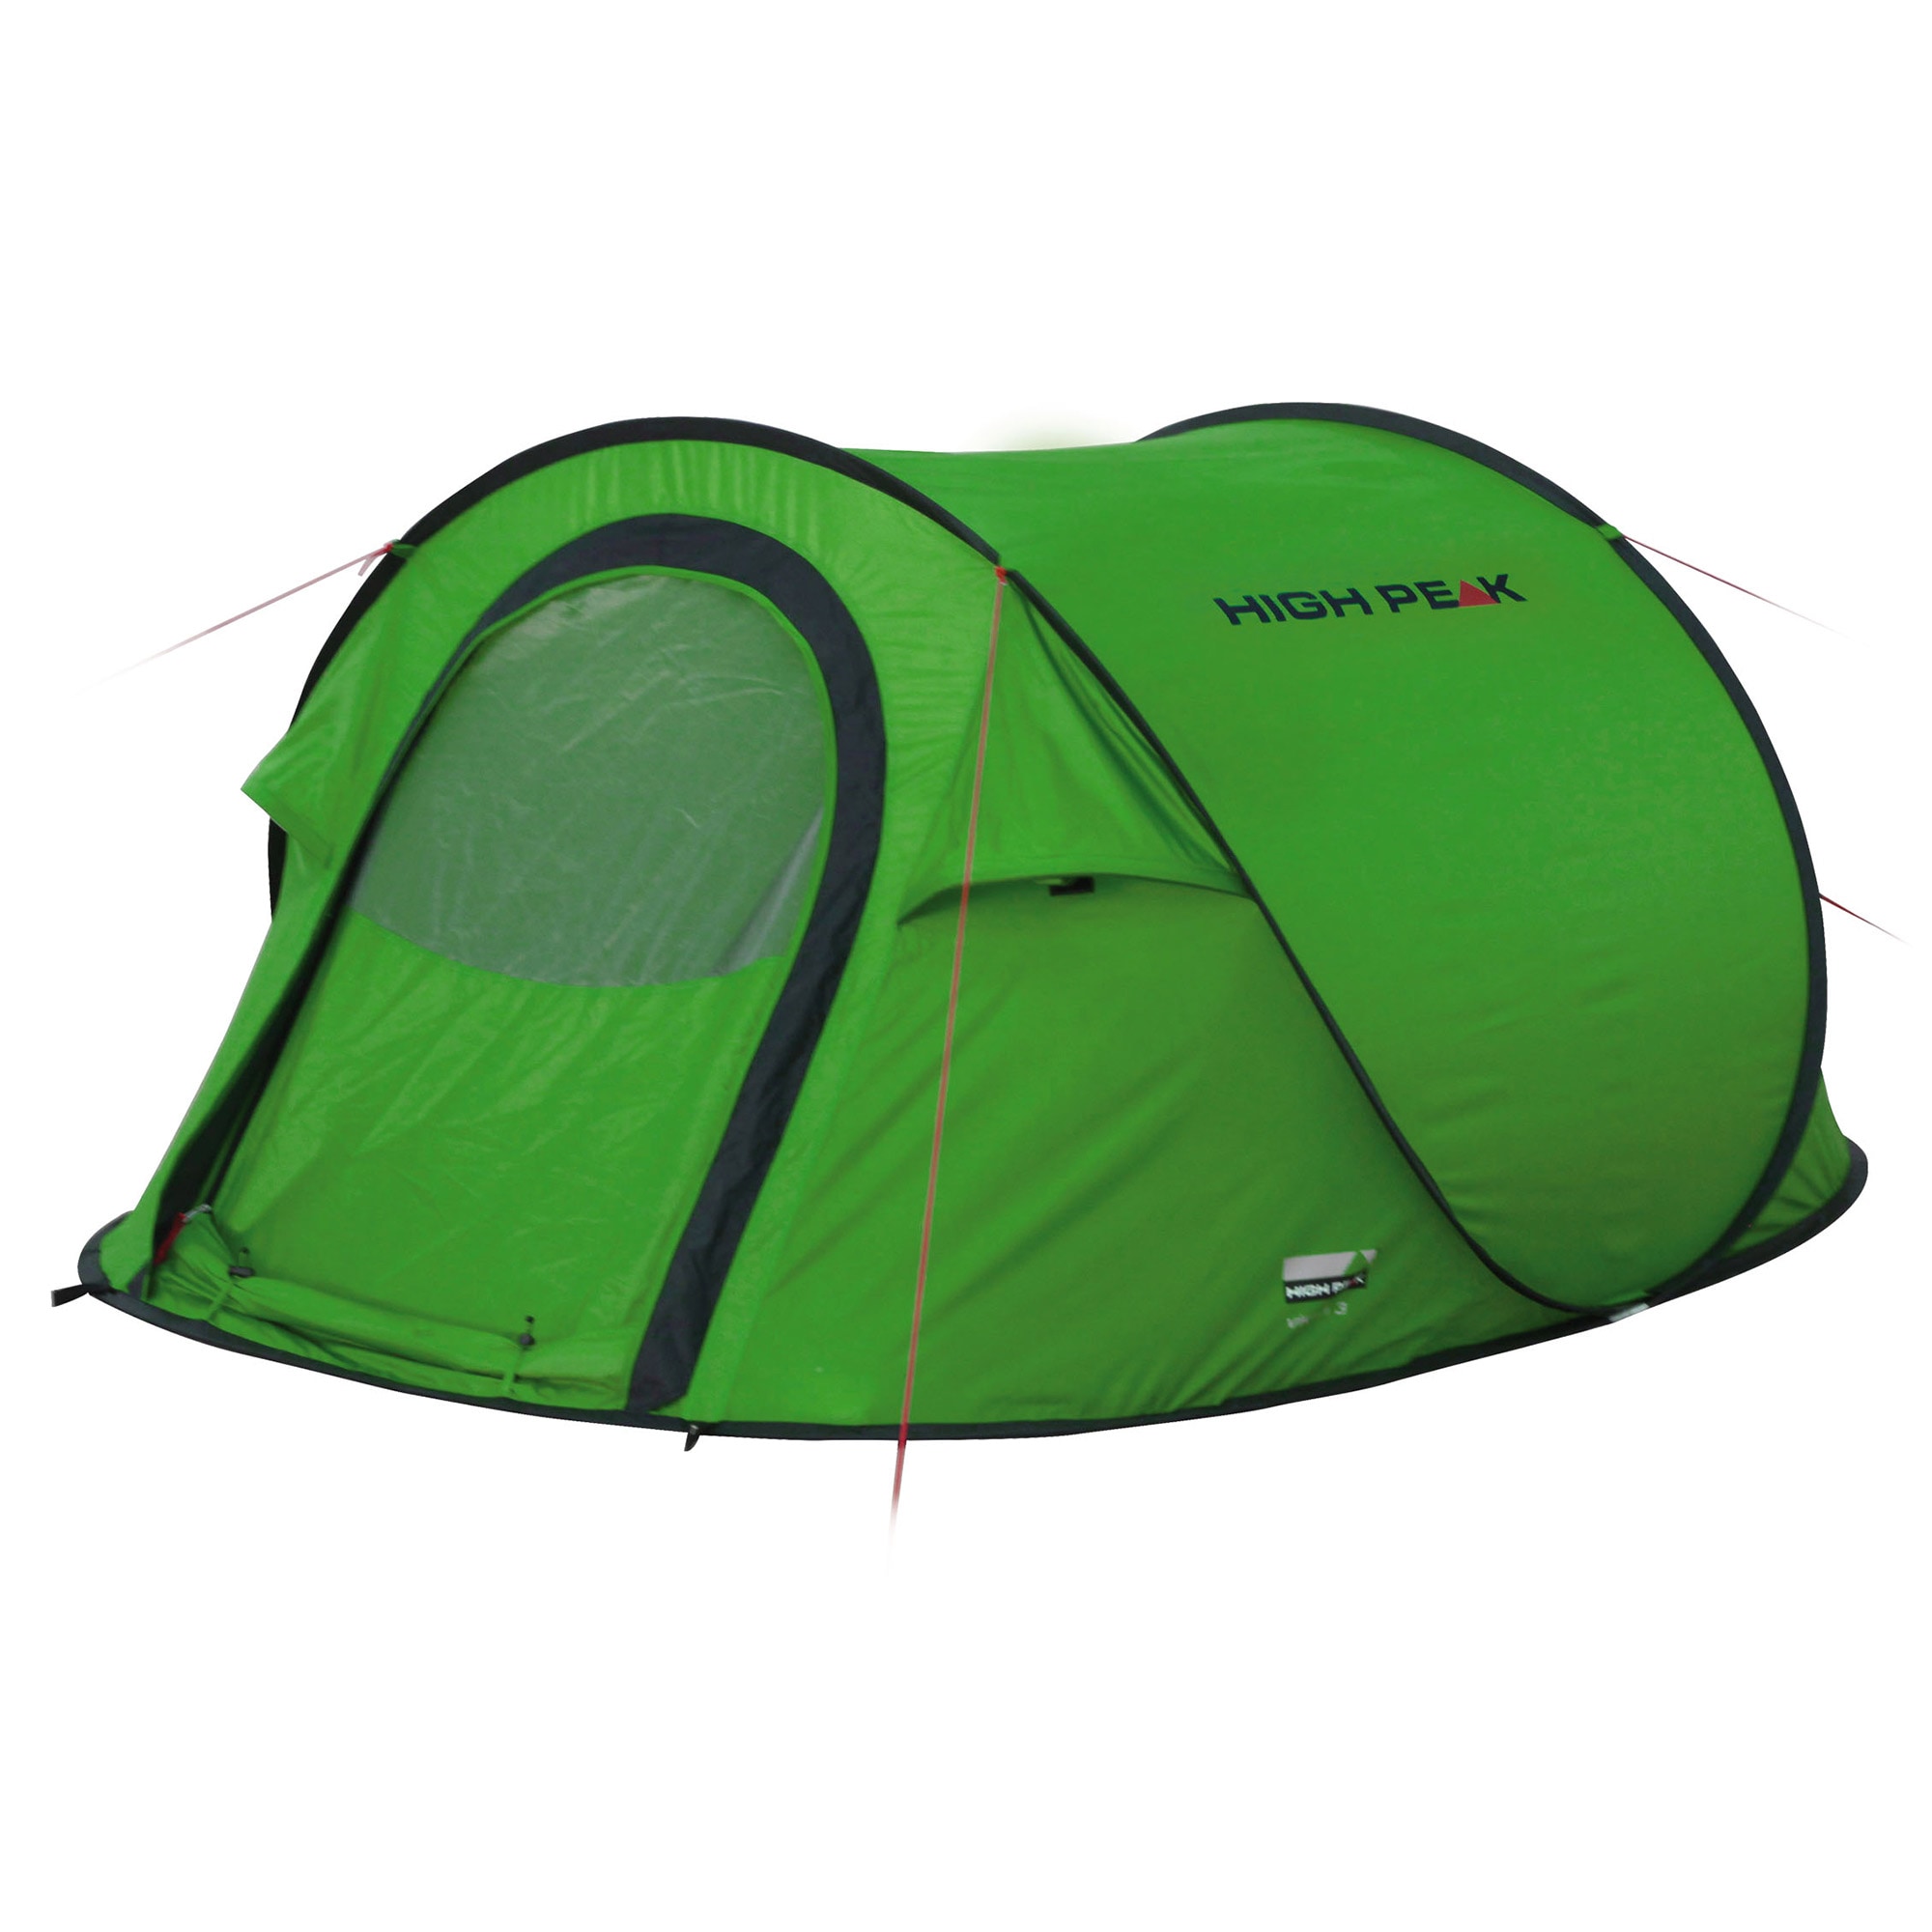 Purchase the High Peak Popup Tent 2 green ASMC